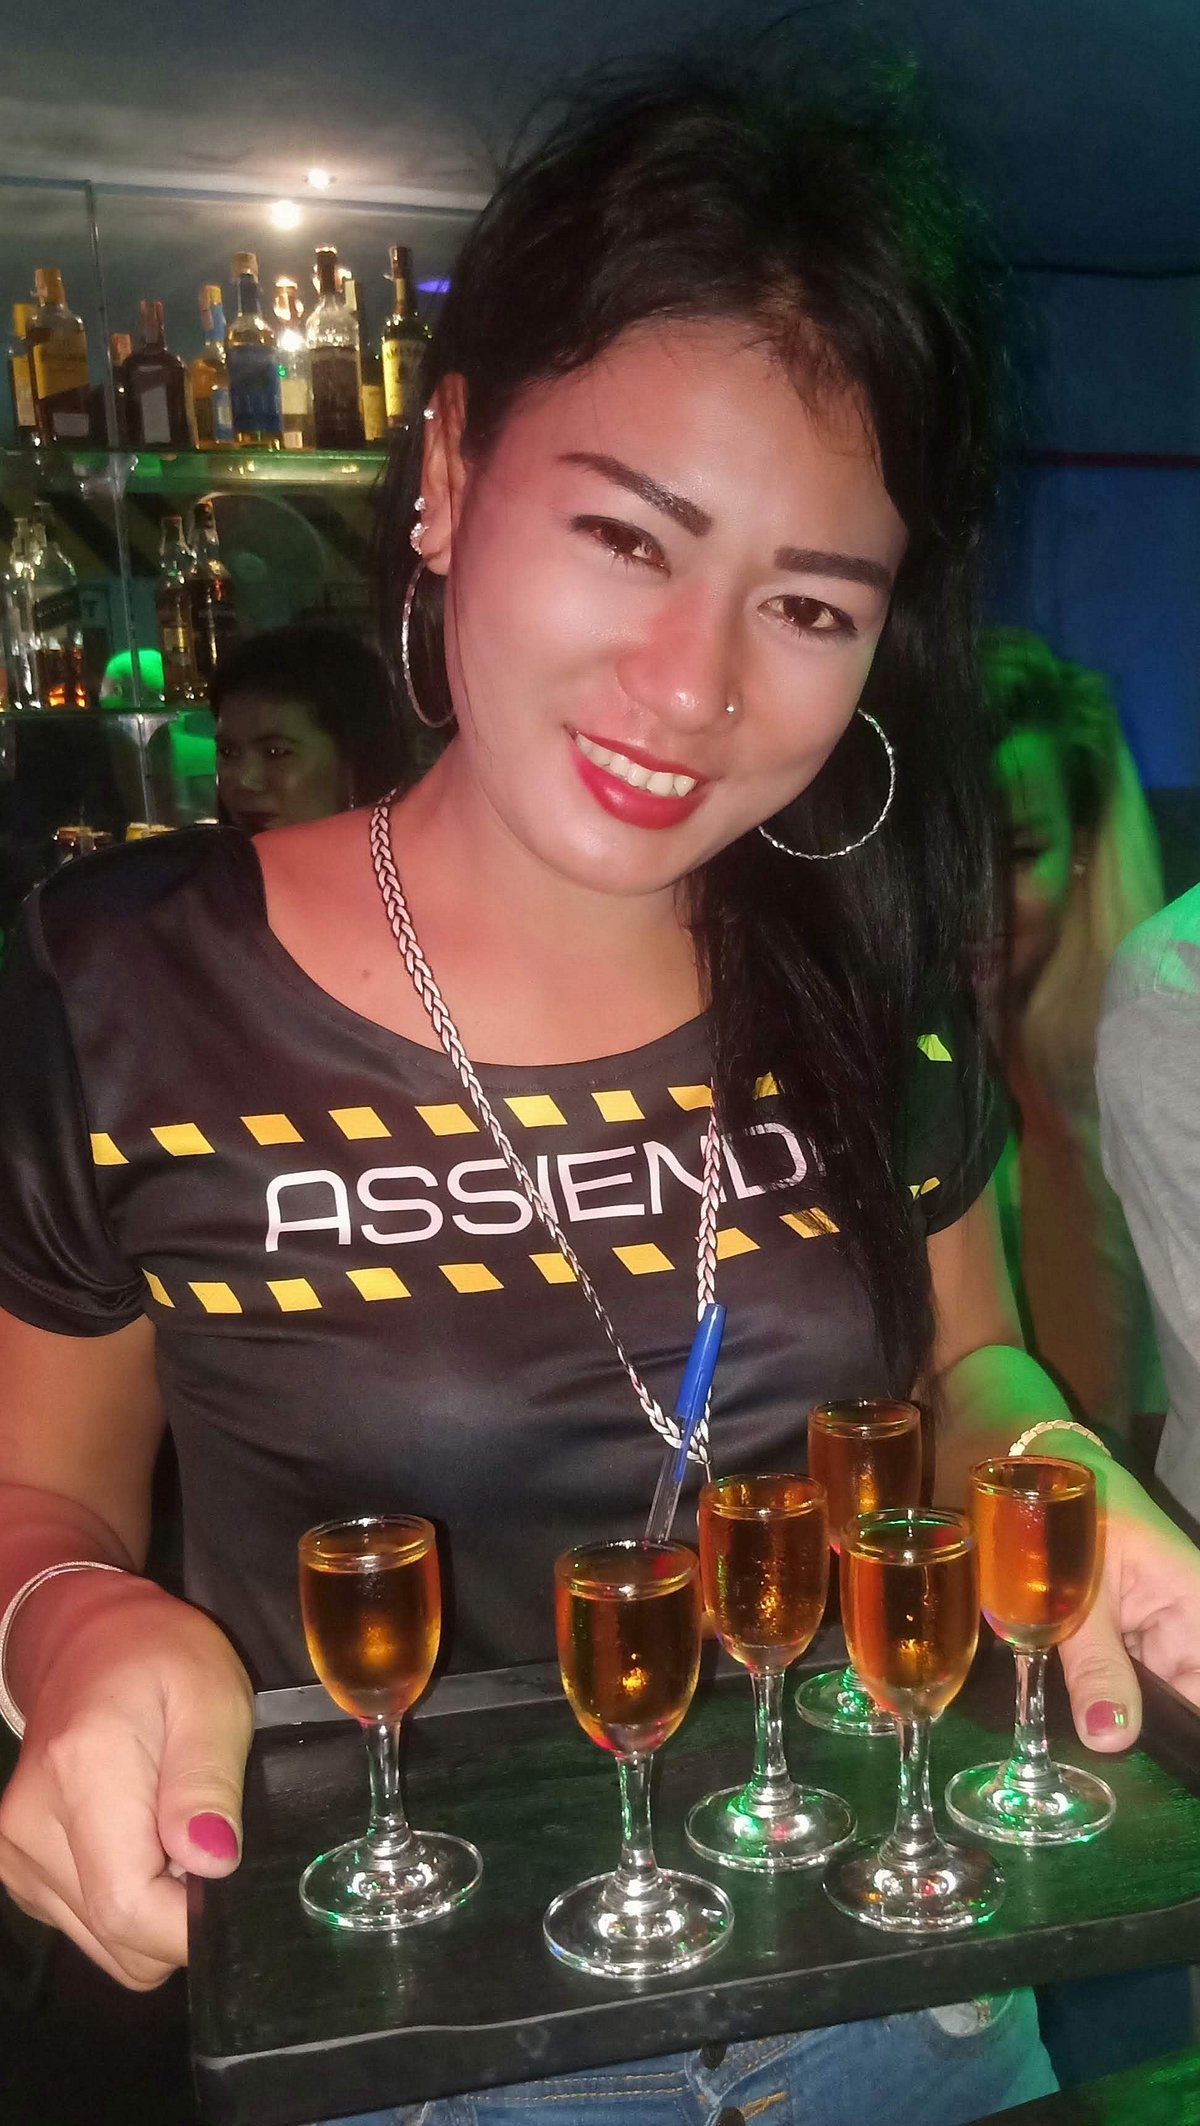 Assienda Pattaya All You Need To Know Before You Go